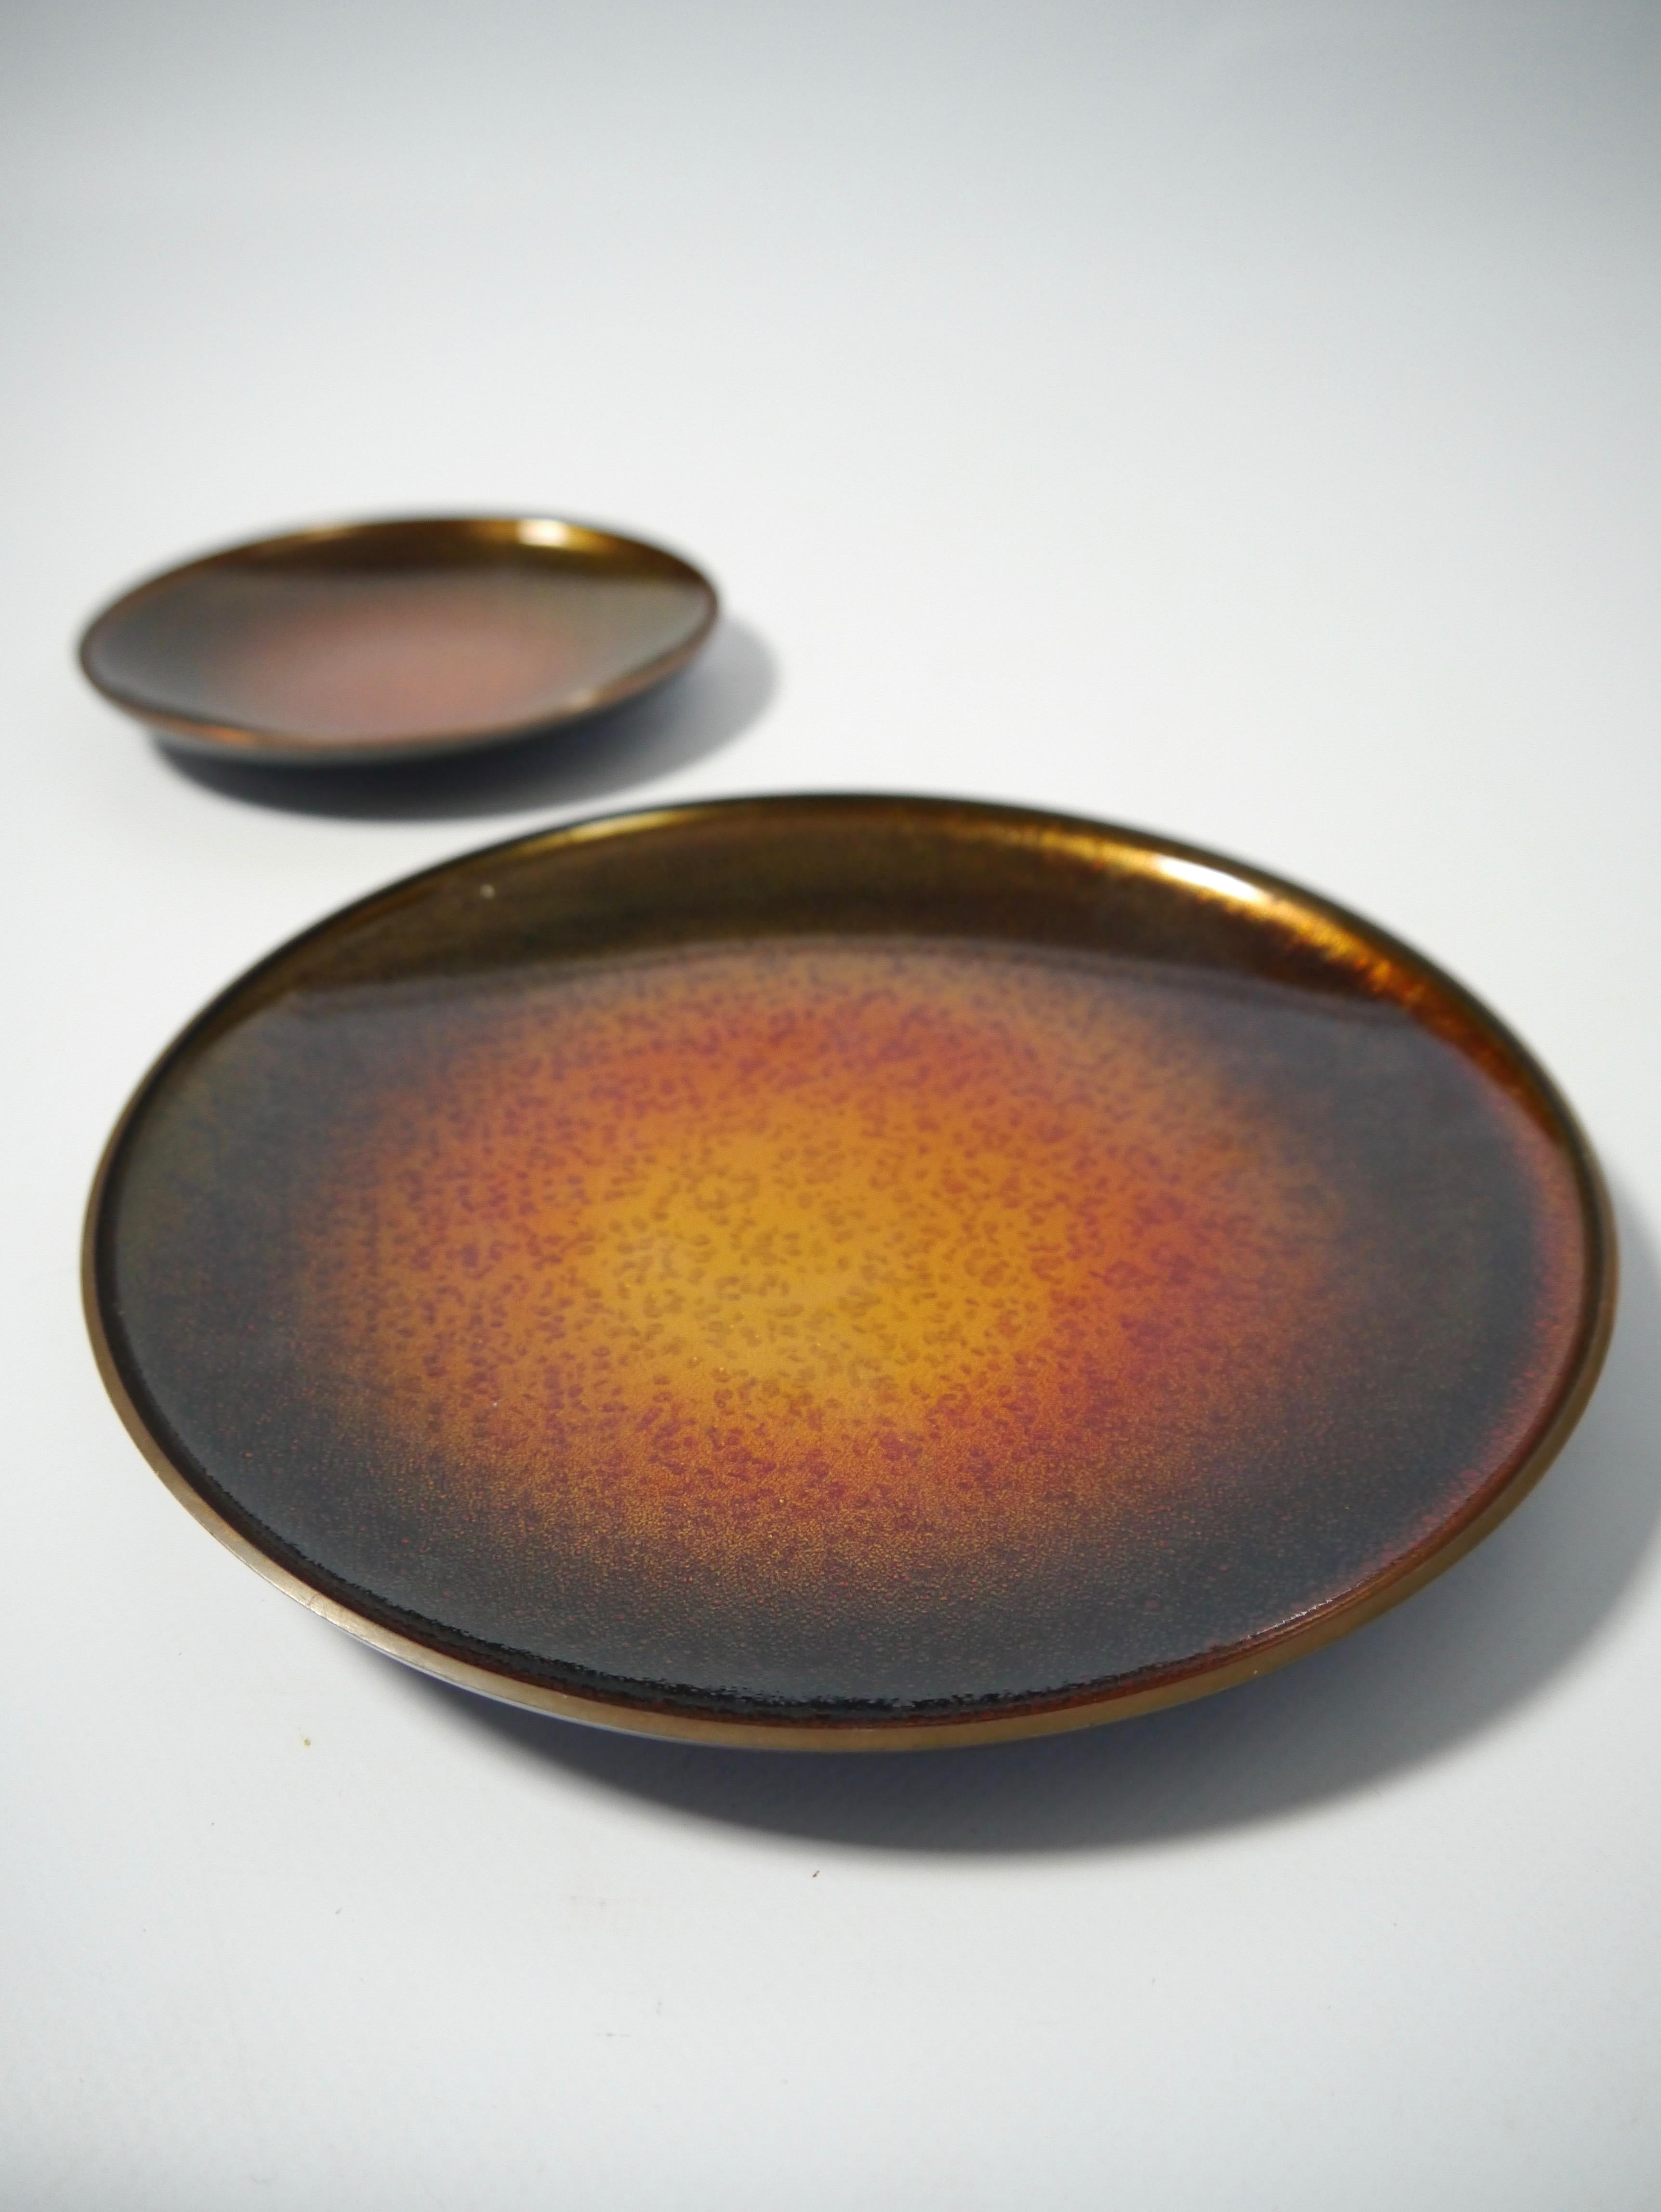 Two trays / plates enamel over copper, by David Andersen 1960s. Big plate has hanging device on back.